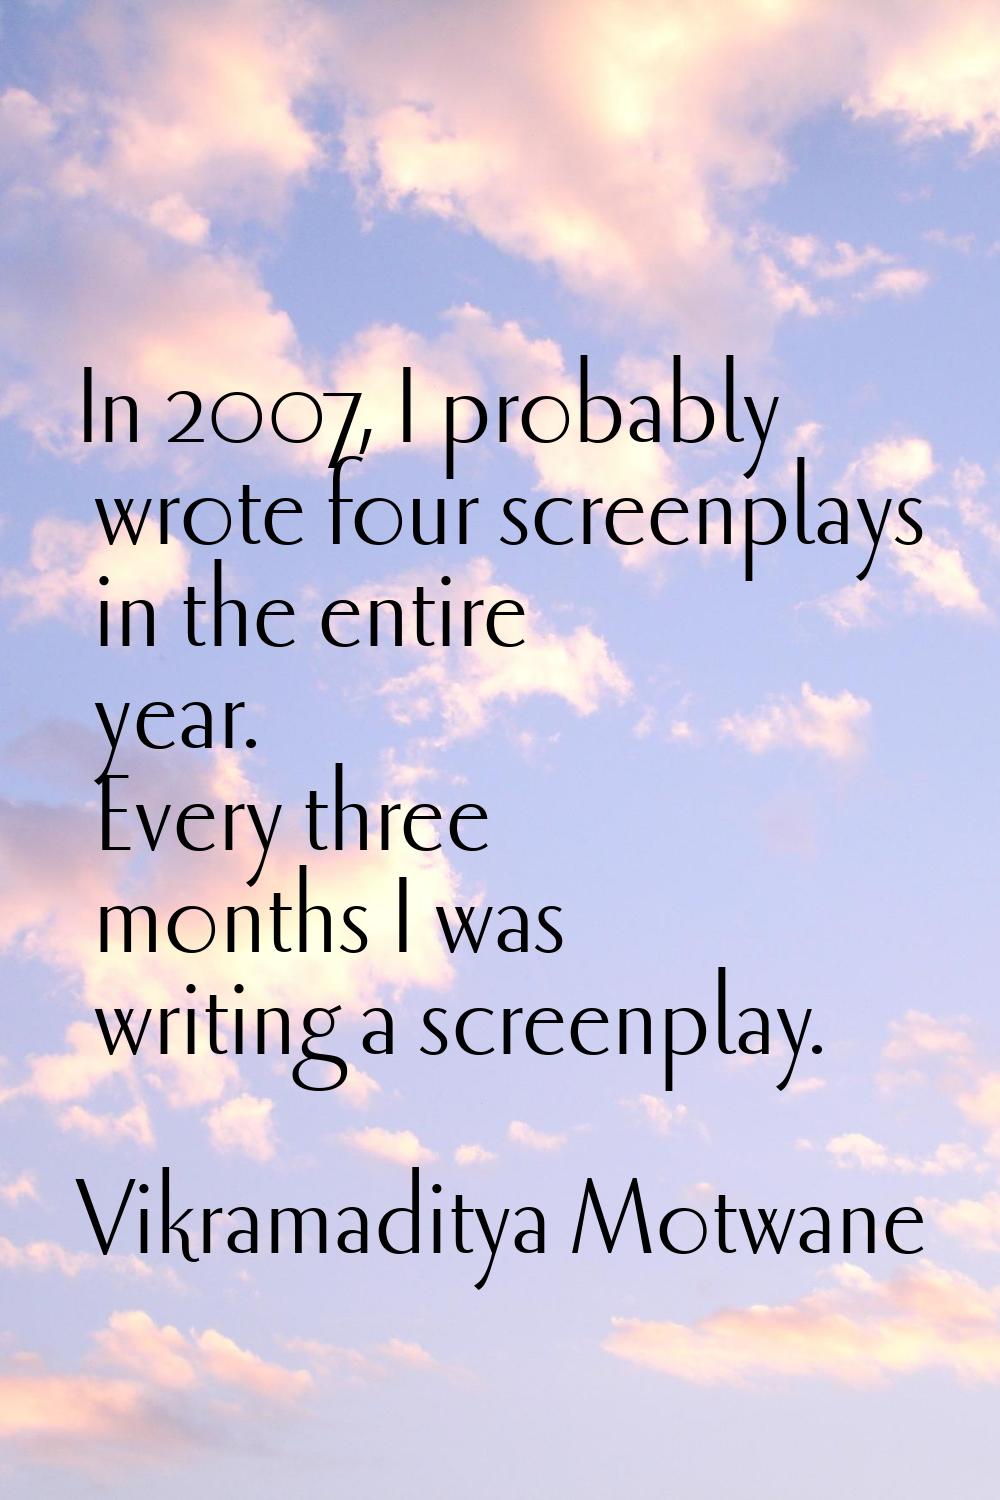 In 2007, I probably wrote four screenplays in the entire year. Every three months I was writing a s